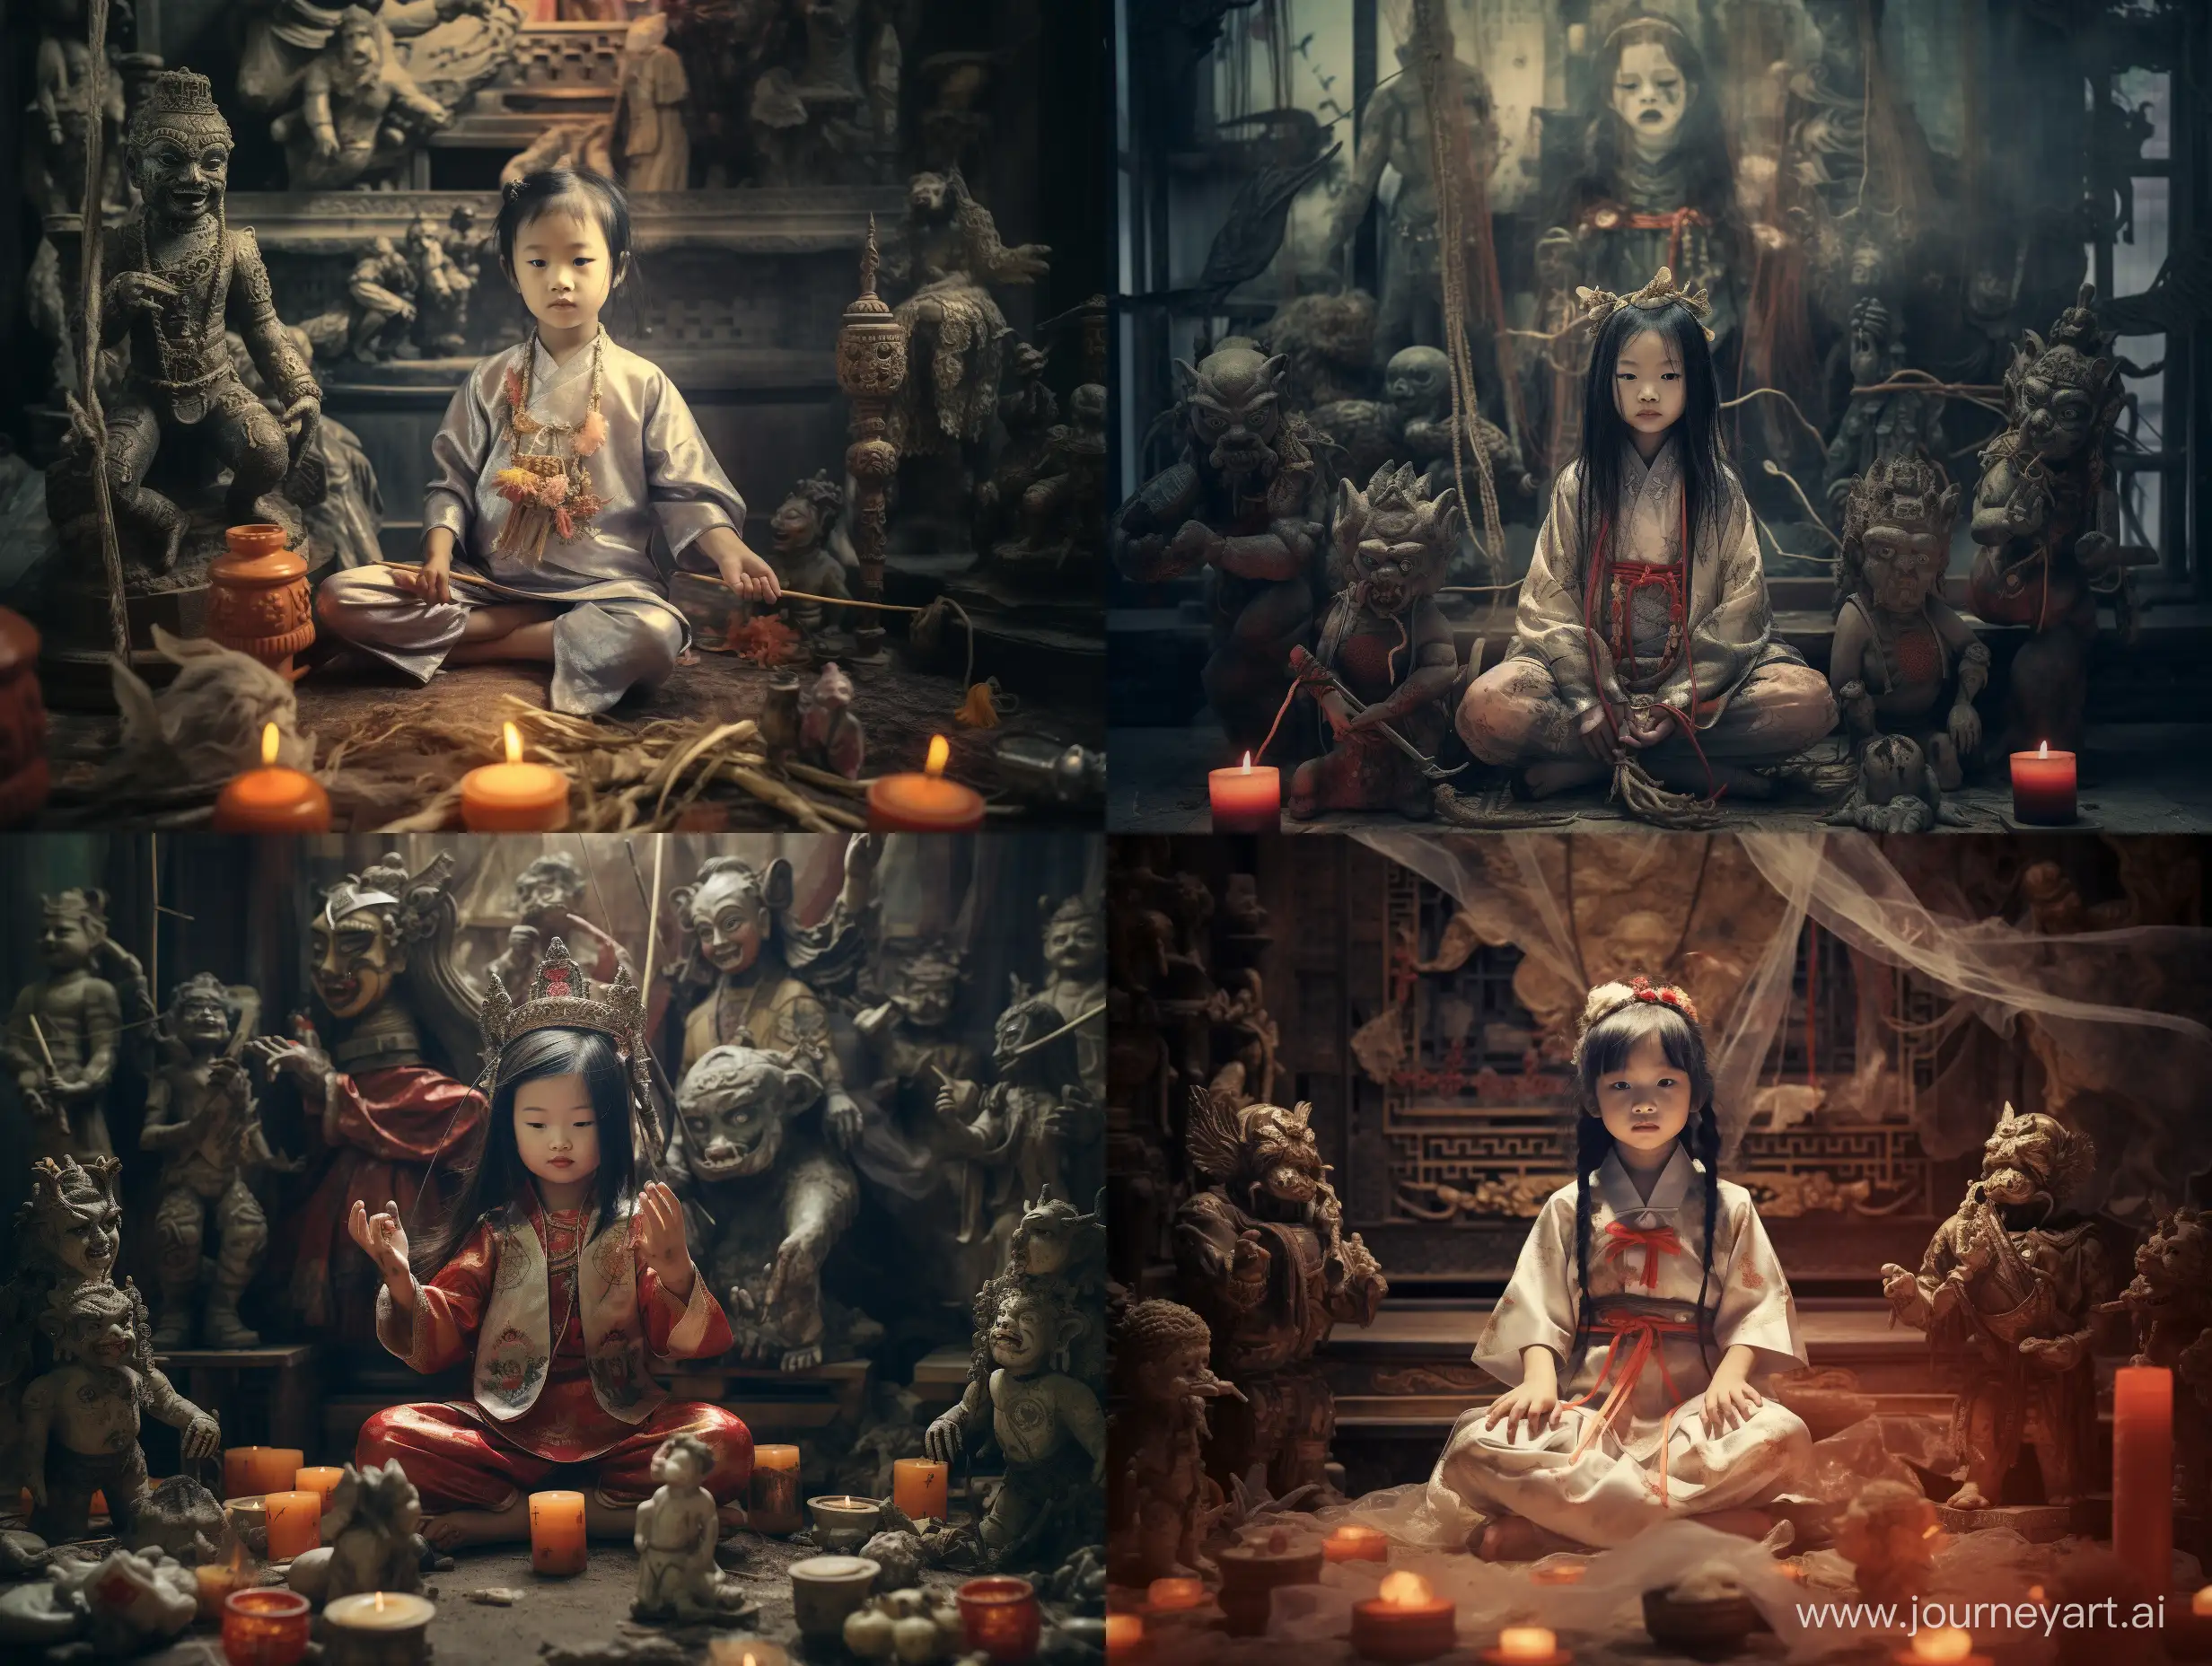 Creepy-Chinese-Temple-Scene-with-Modern-Girl-in-New-Year-Attire